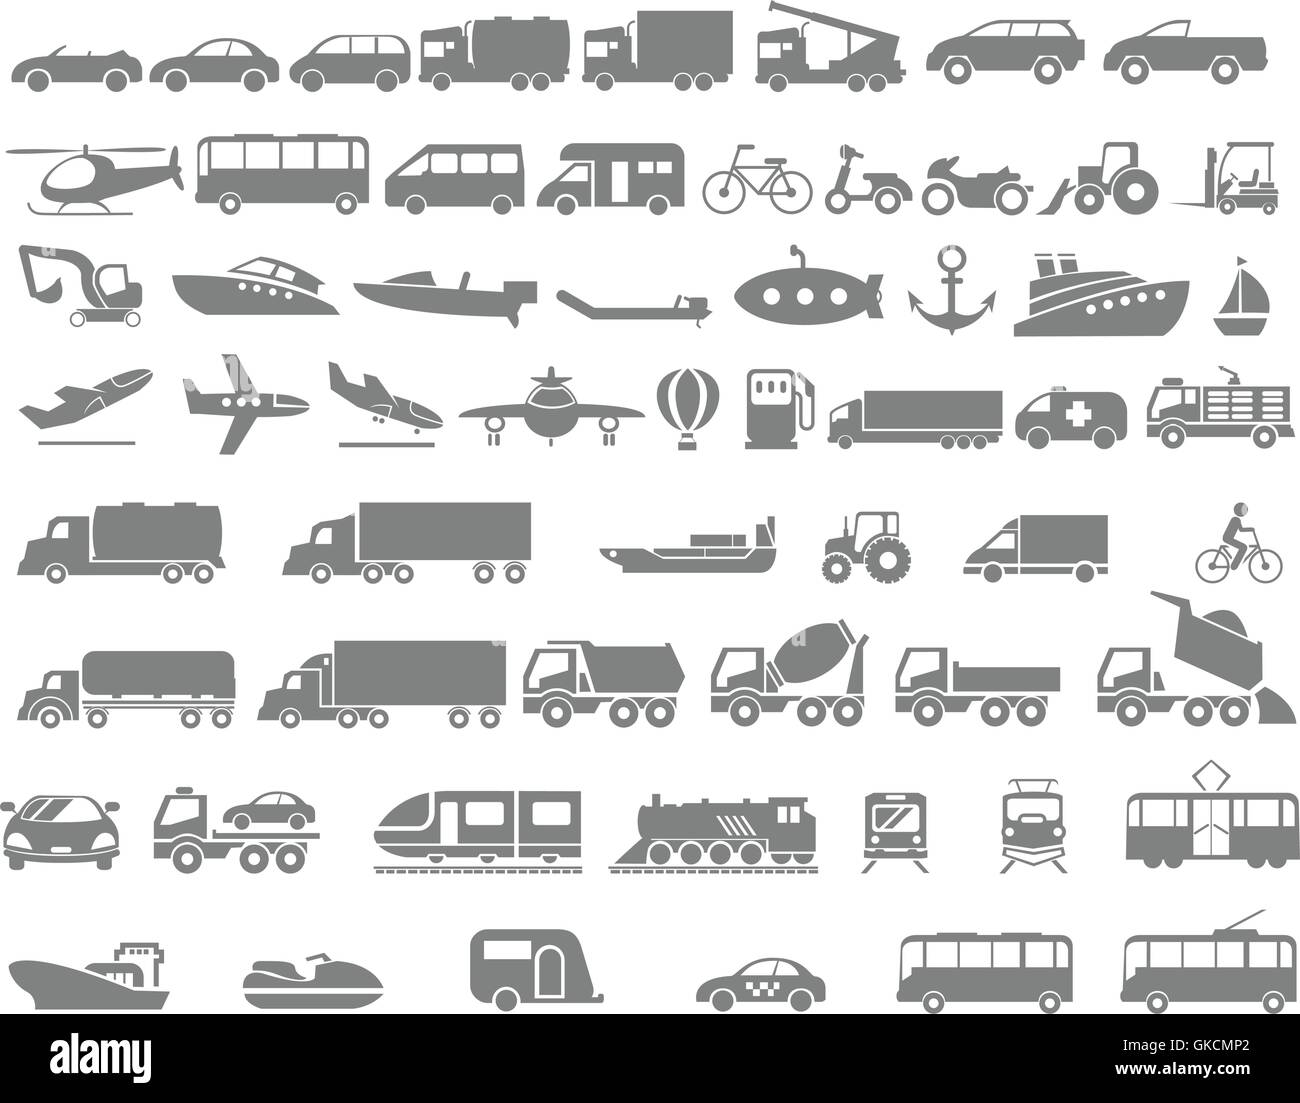 Vehicle and Transportation flat icon set Stock Vector